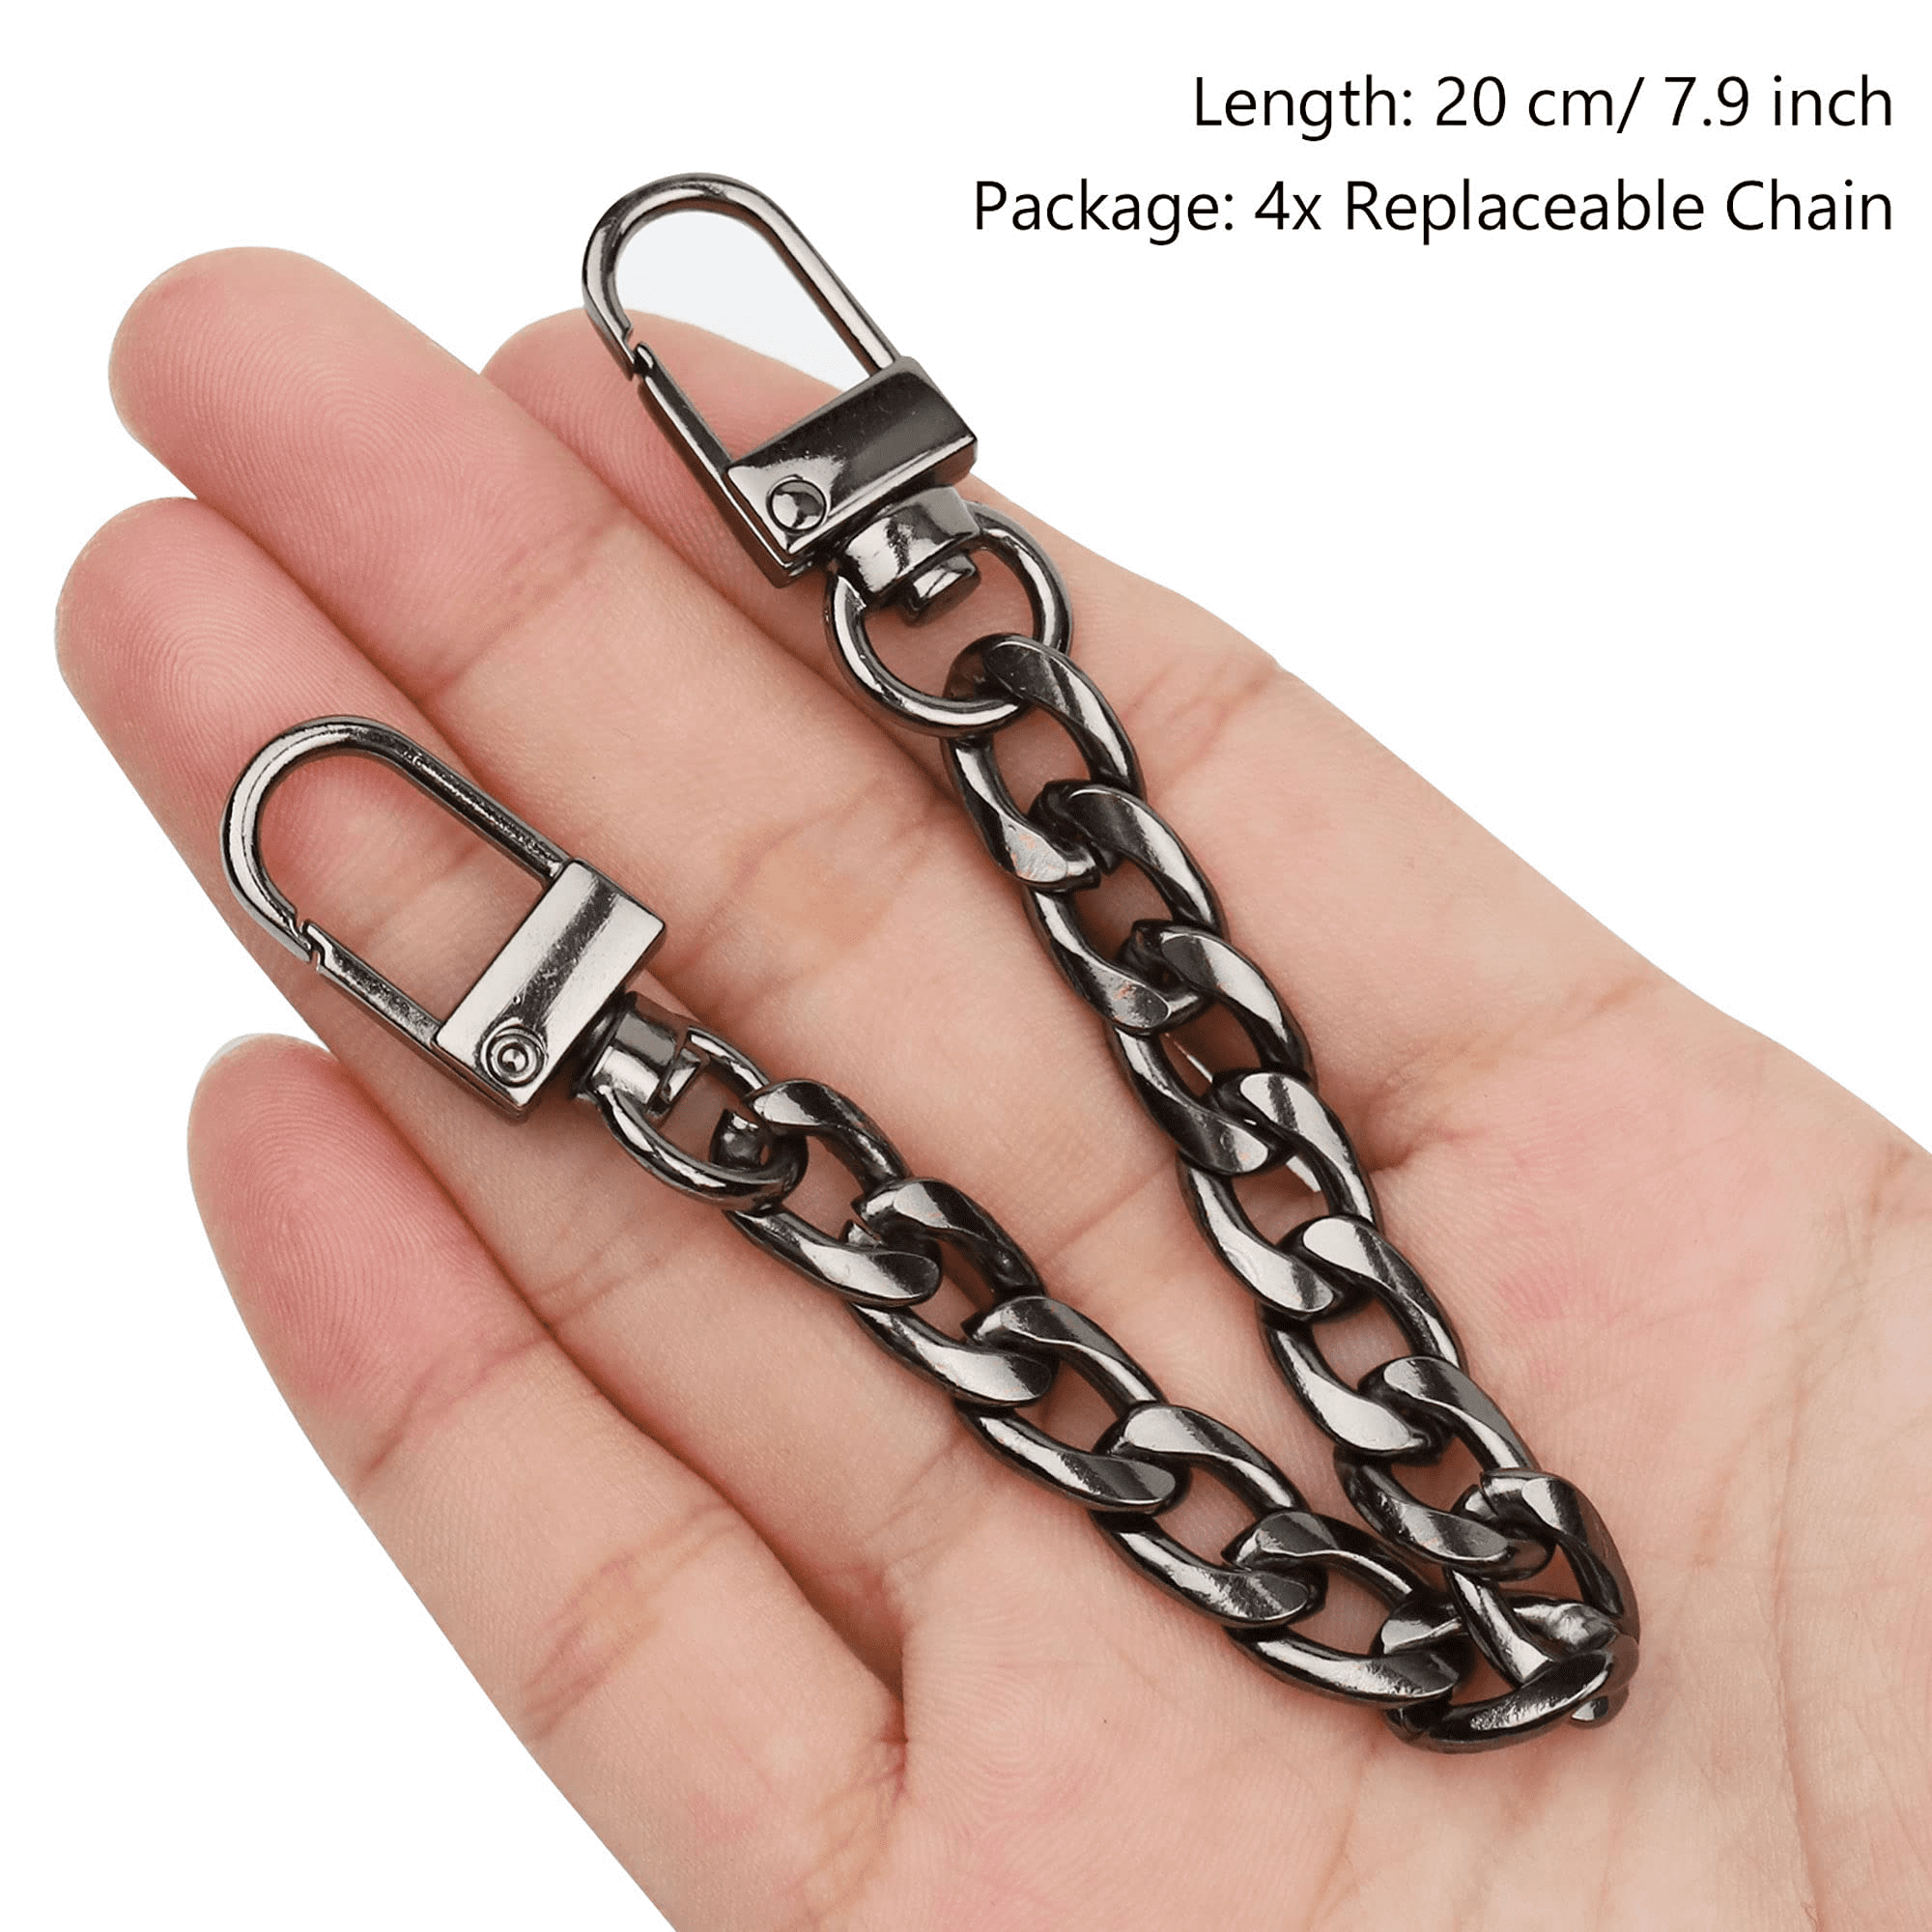  4 Pieces Silver Purse Chain Strap Metal Purse Strap Extender  Handle Bag Accessories for Replacement Flat Chain Strap with Metal Buckles  DIY Handbags Crafts, 47.2/31.5/15.7/7.9 Inches (Silver)